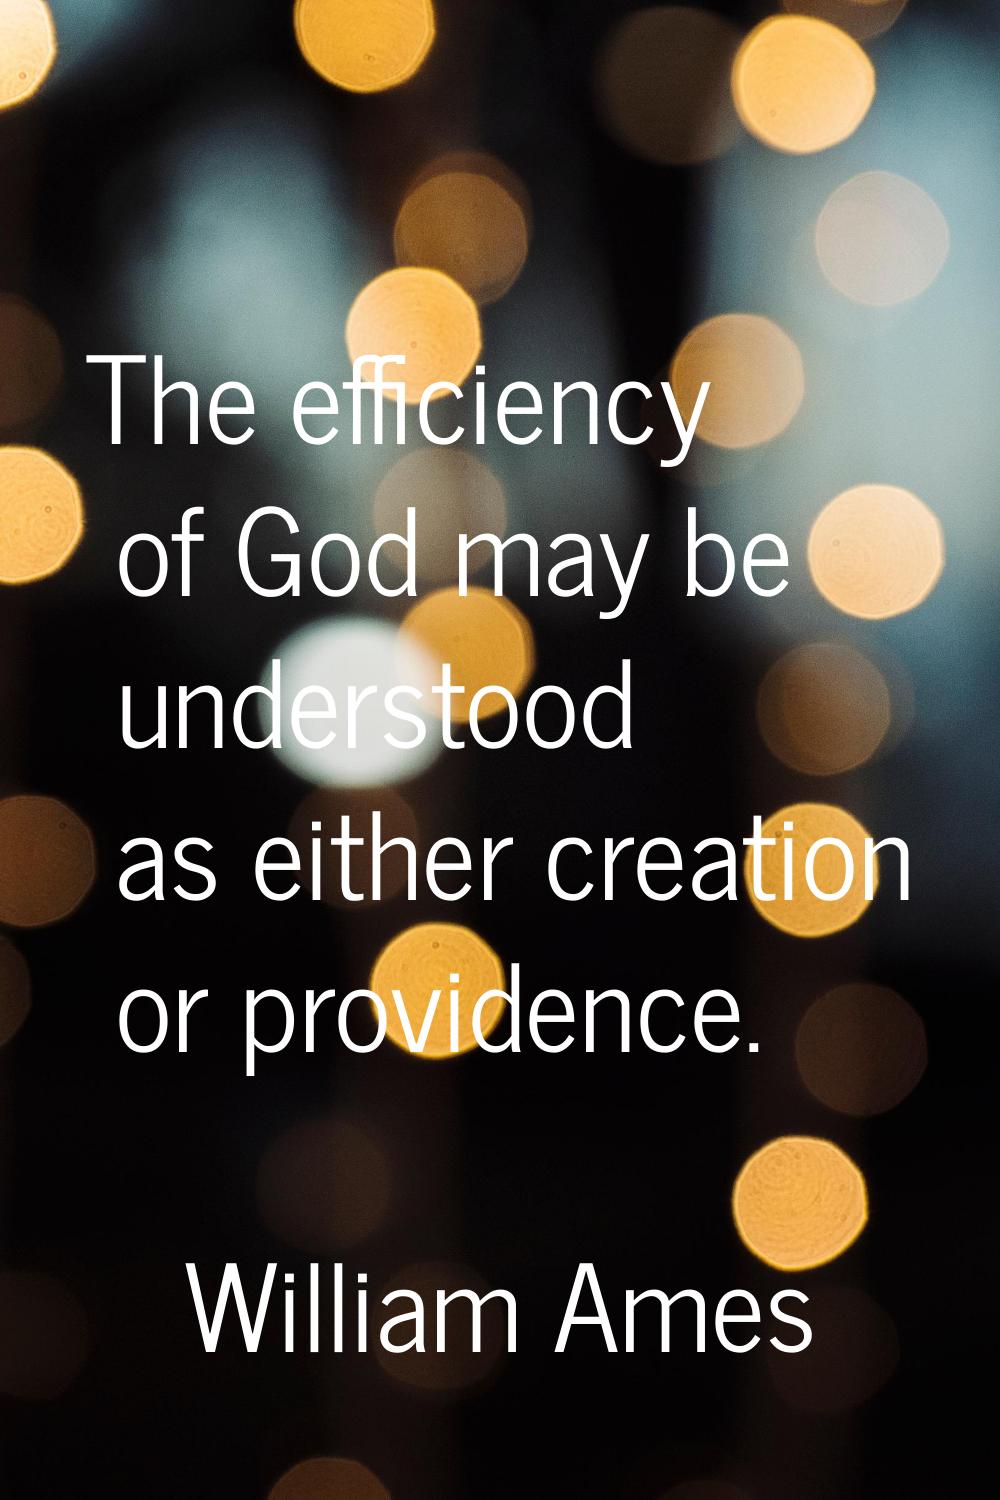 The efficiency of God may be understood as either creation or providence.